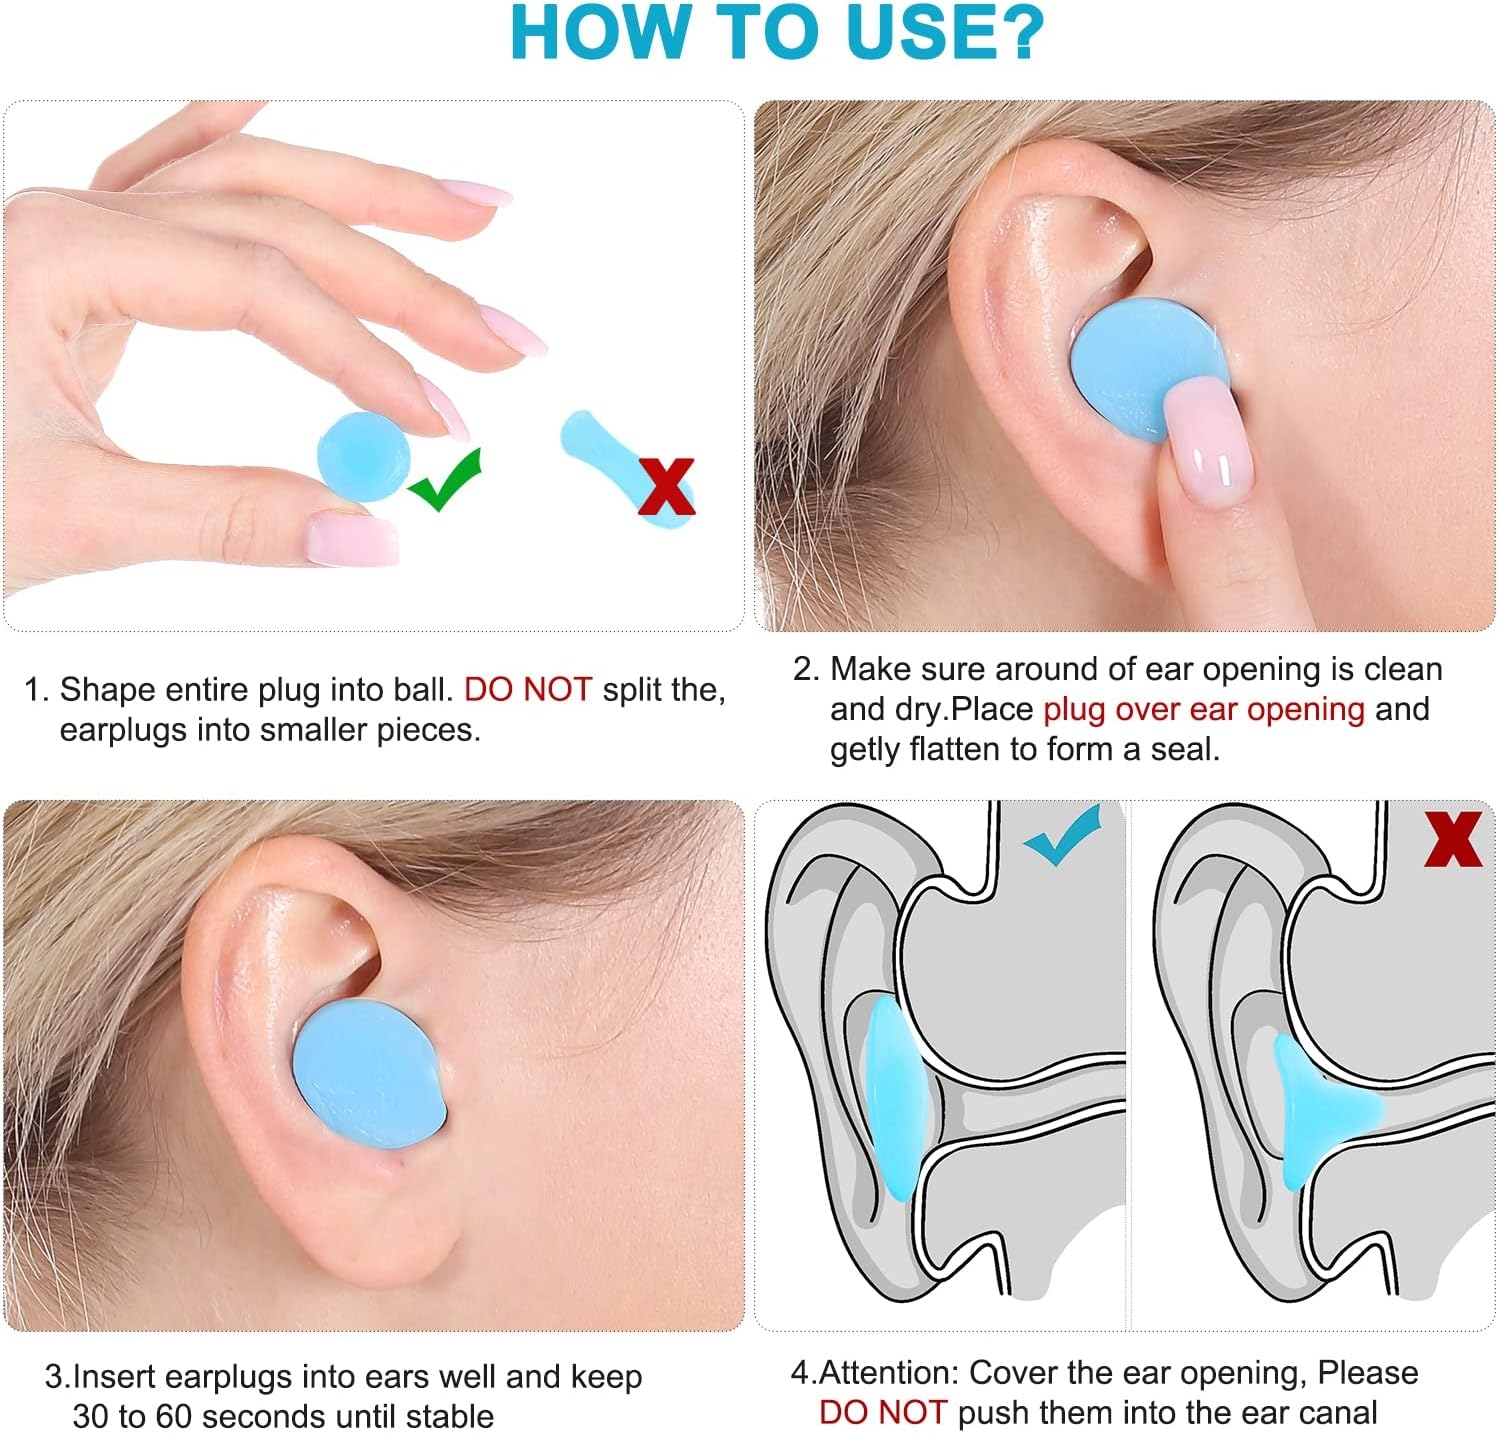 Reusable Silicone Ear Plugs, Waterproof Noise Cancelling Ear Plugs for Sleeping, Shooting, Airplanes, Concerts, Mowing, 22dB Highest NRR